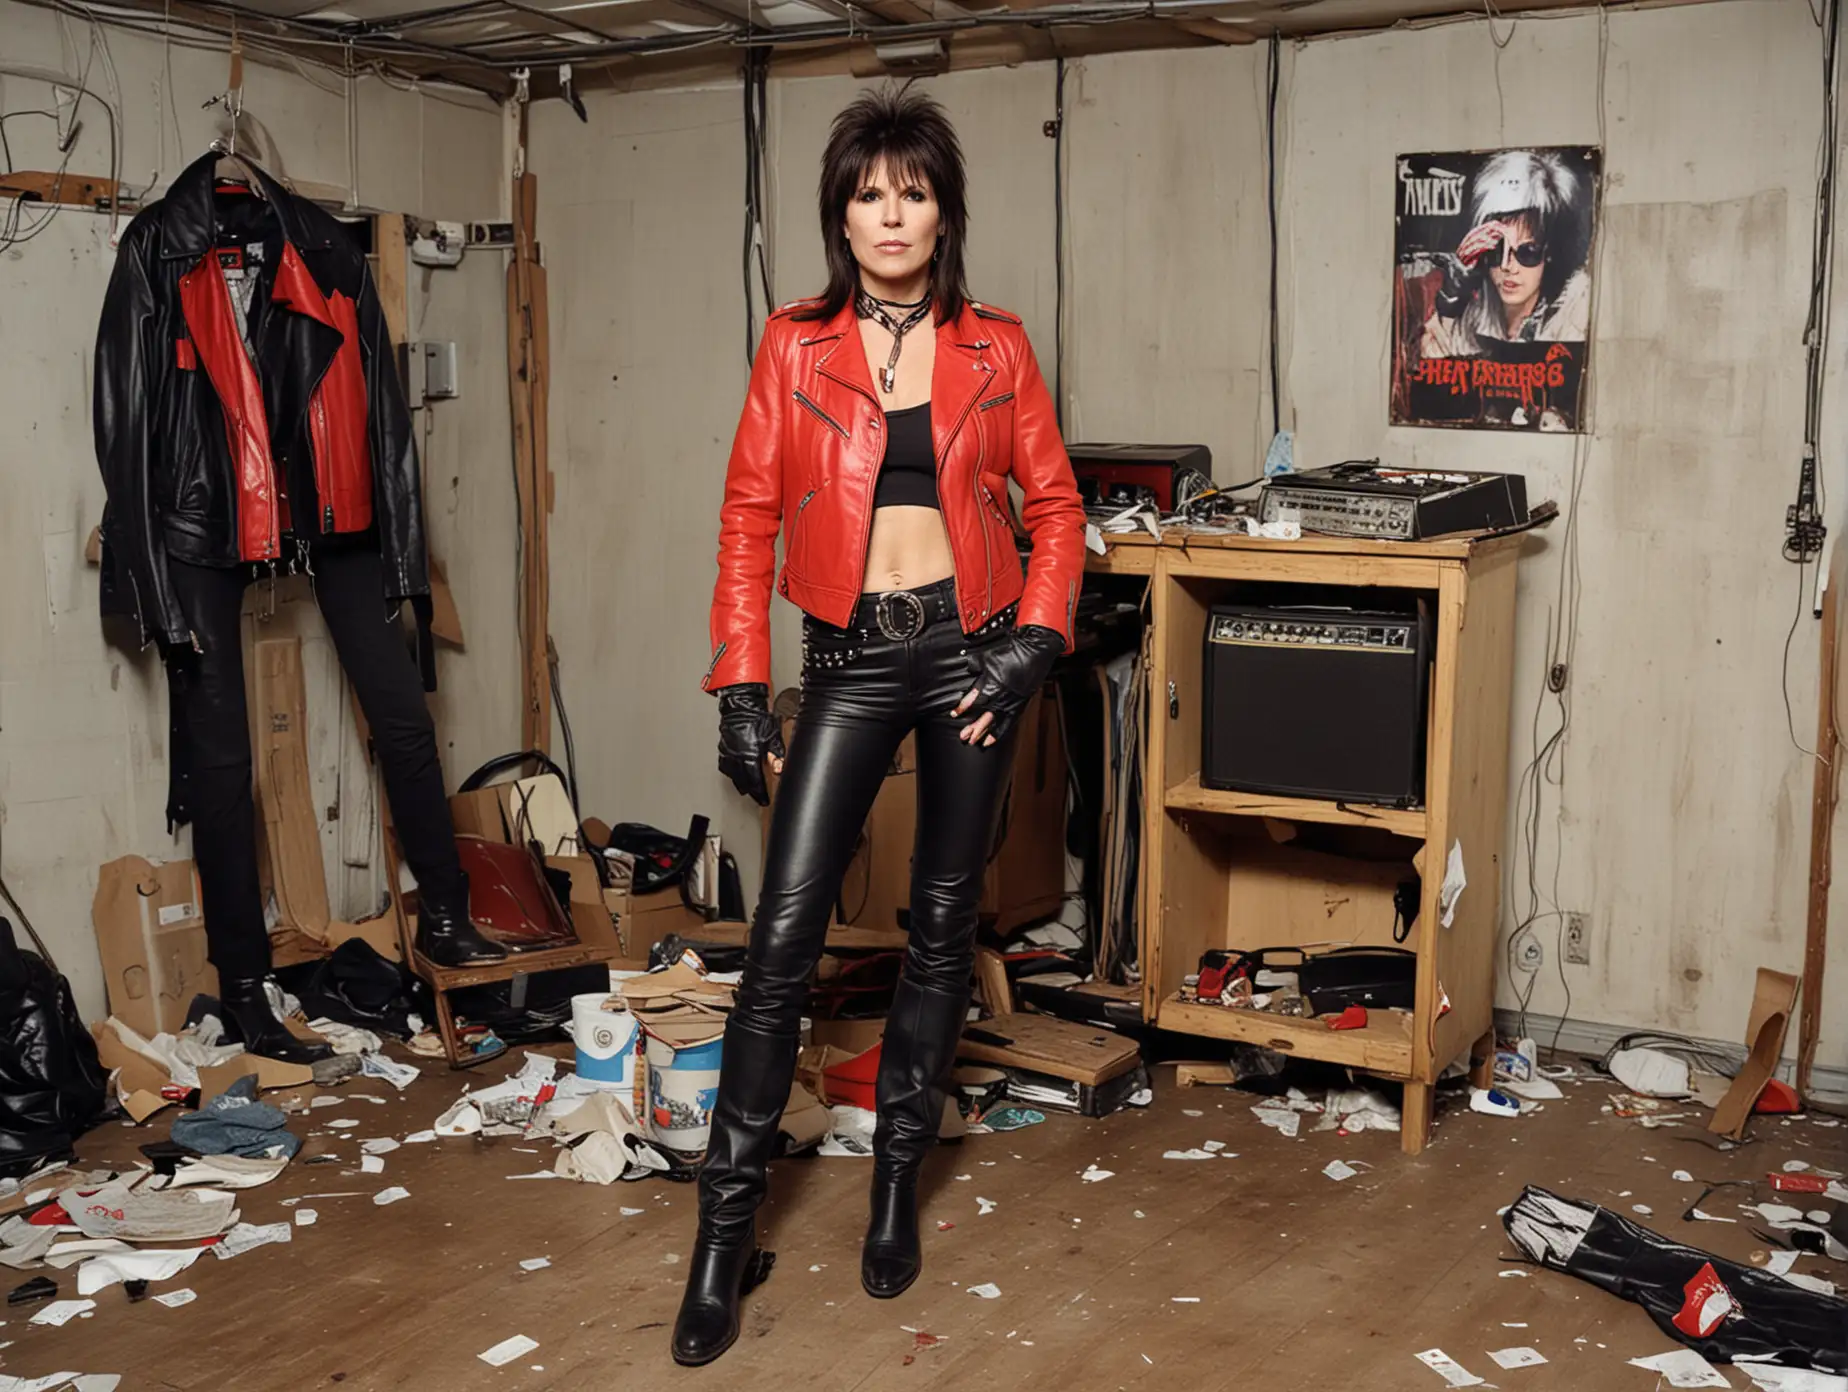 a full view of of a busty, drunk, 70s rocker chrissie hynde of the pretenders wearing zipped up, fastened red leather jacket, black leather pants, red leather boots, black leather gloves standing in a trashed backstage dressing room